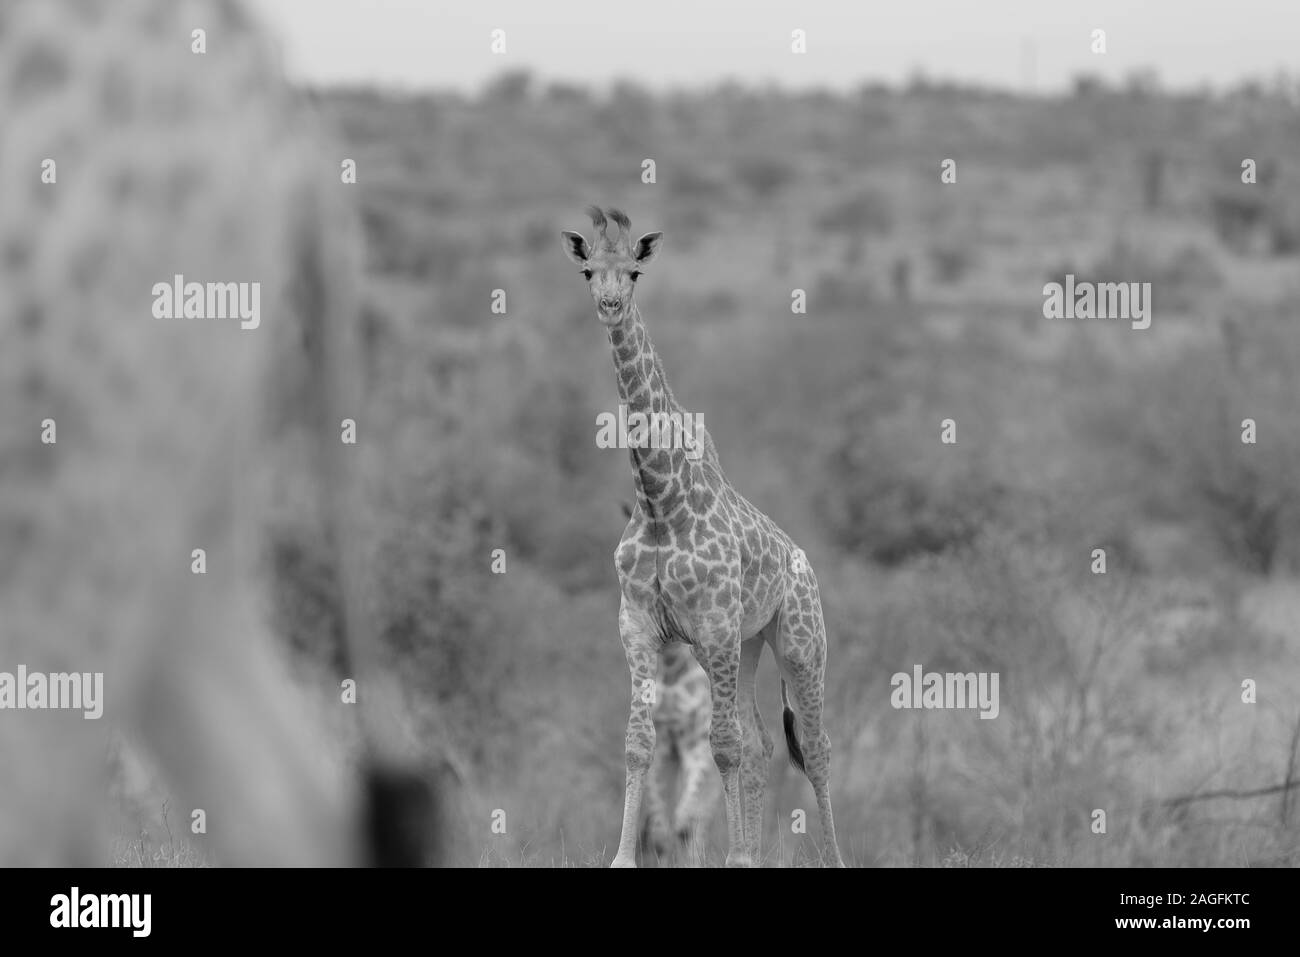 Grayscale selective focus shot of a giraffe looking towards the camera Stock Photo